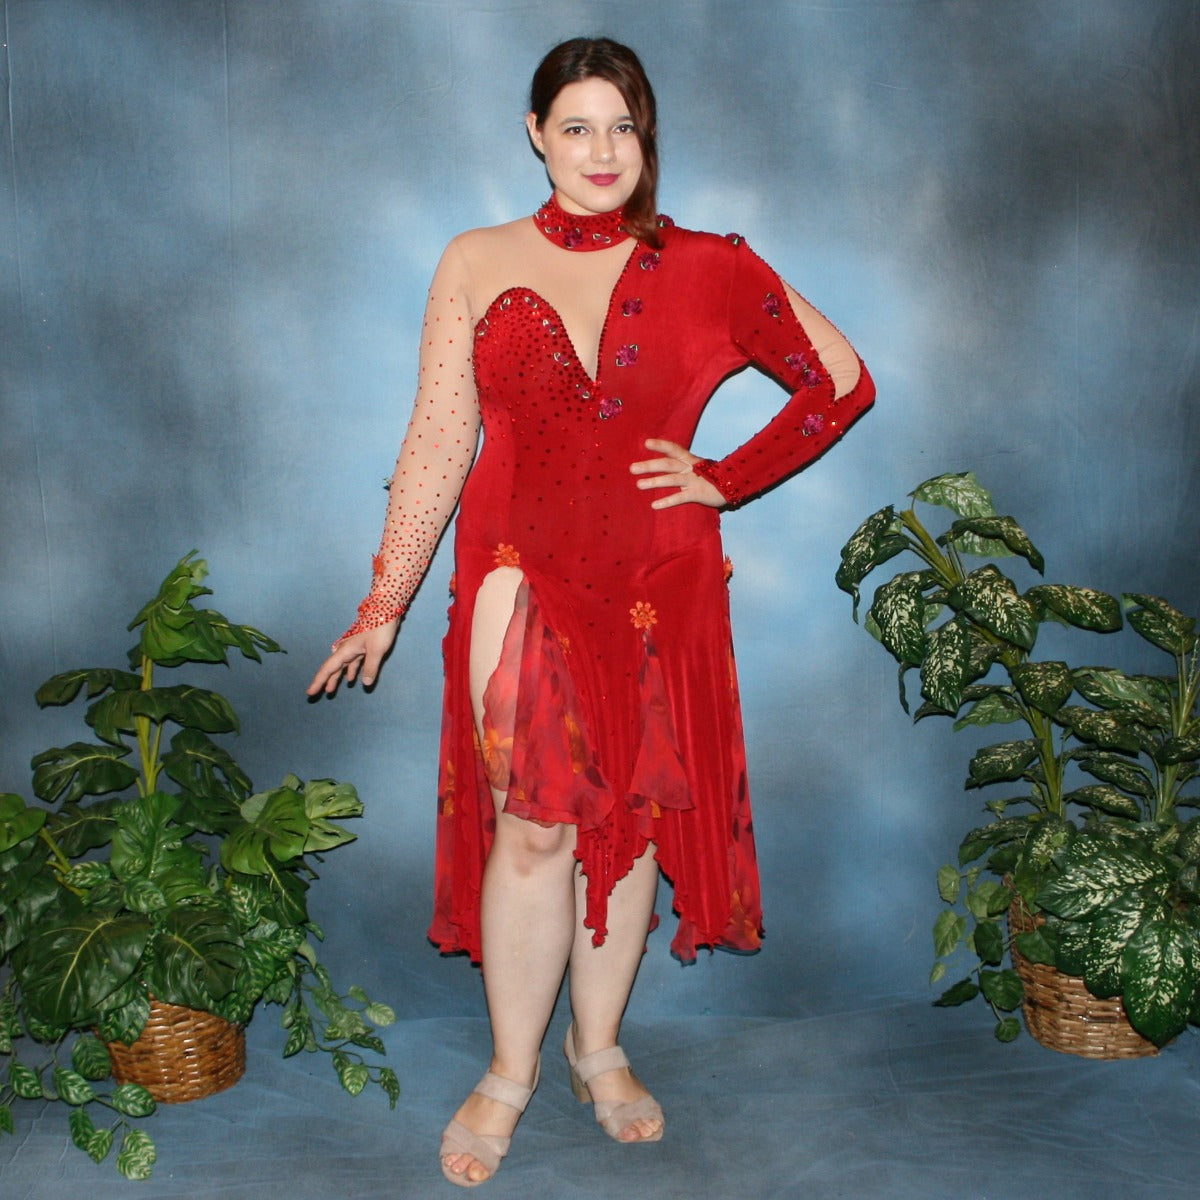 Red Latin/rhythm dance dress created in luxurious red solid slinky over nude illusion base with printed chiffon insets in skirting, is embellished with ruby & hyacinth Swarovski rhinestones plus silk roses.